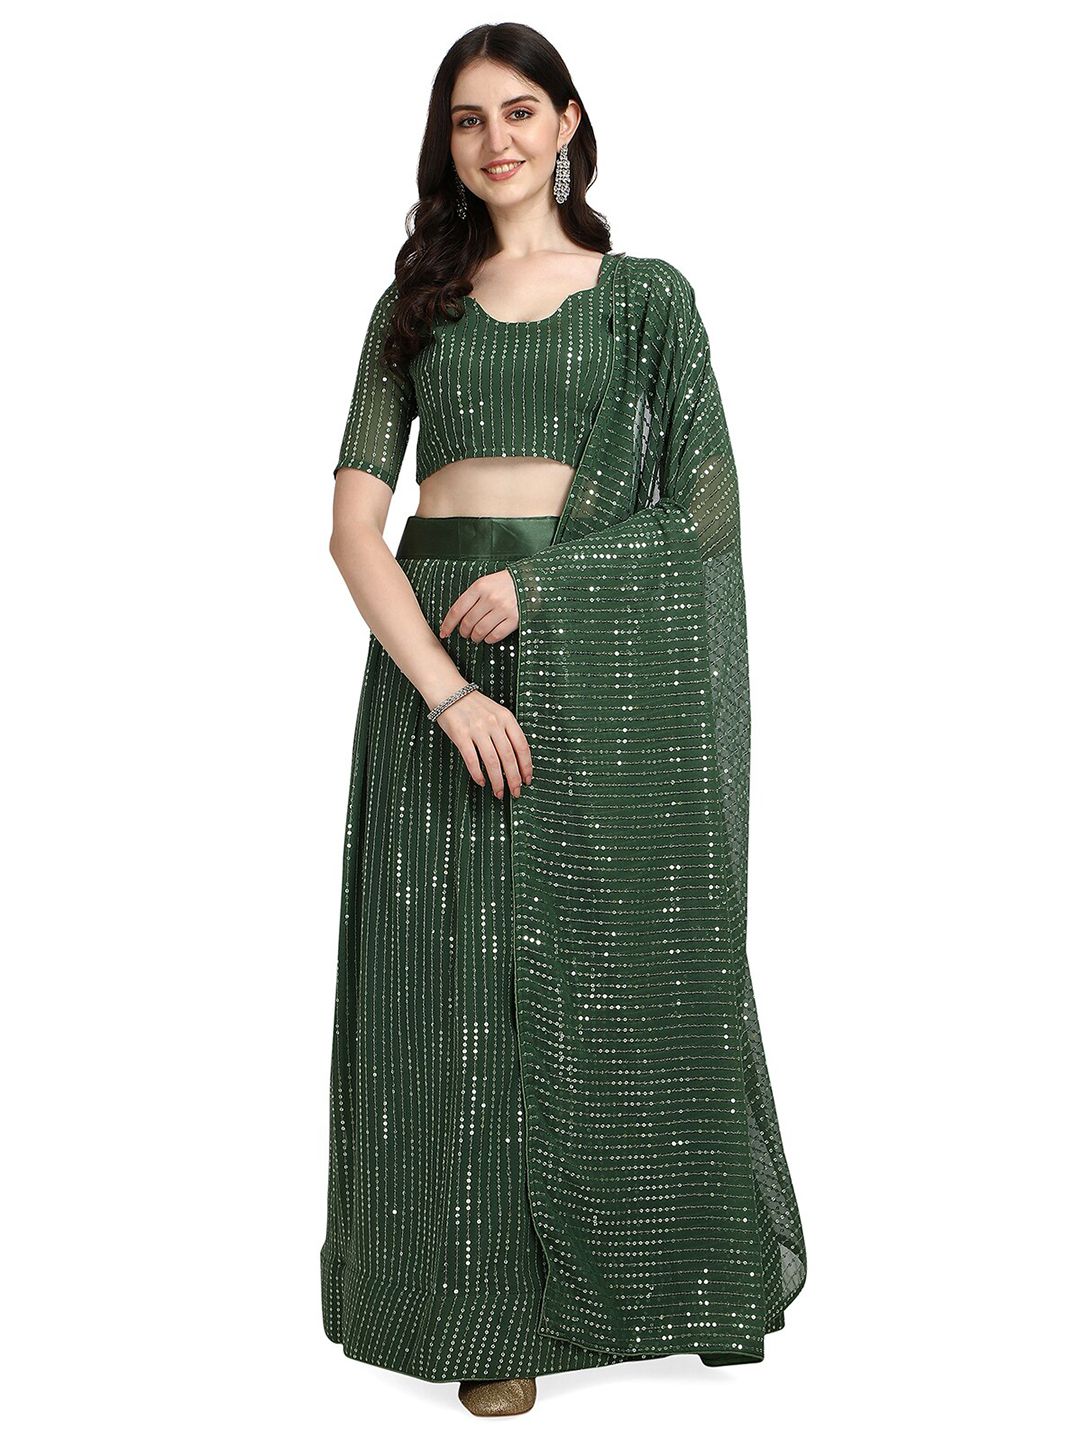 Pratham Blue Green Embroidered Sequinned Semi-Stitched Lehenga & Unstitched Blouse With Dupatta Price in India